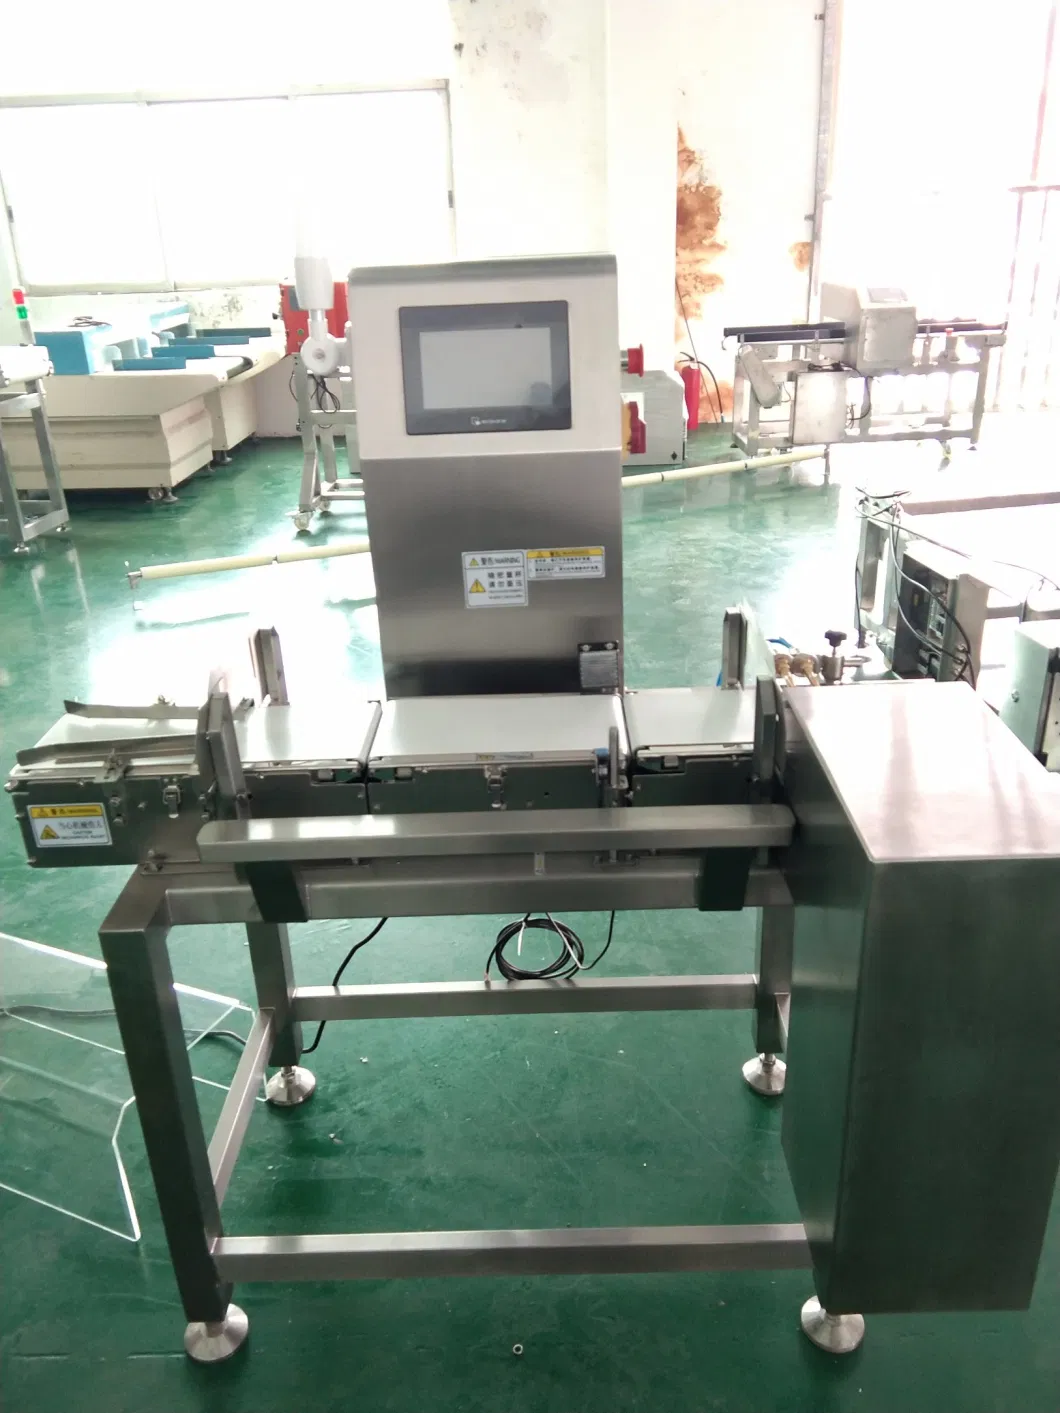 Online Heavy Duty Conveyor Check Weigher for Boxes (CW-200)